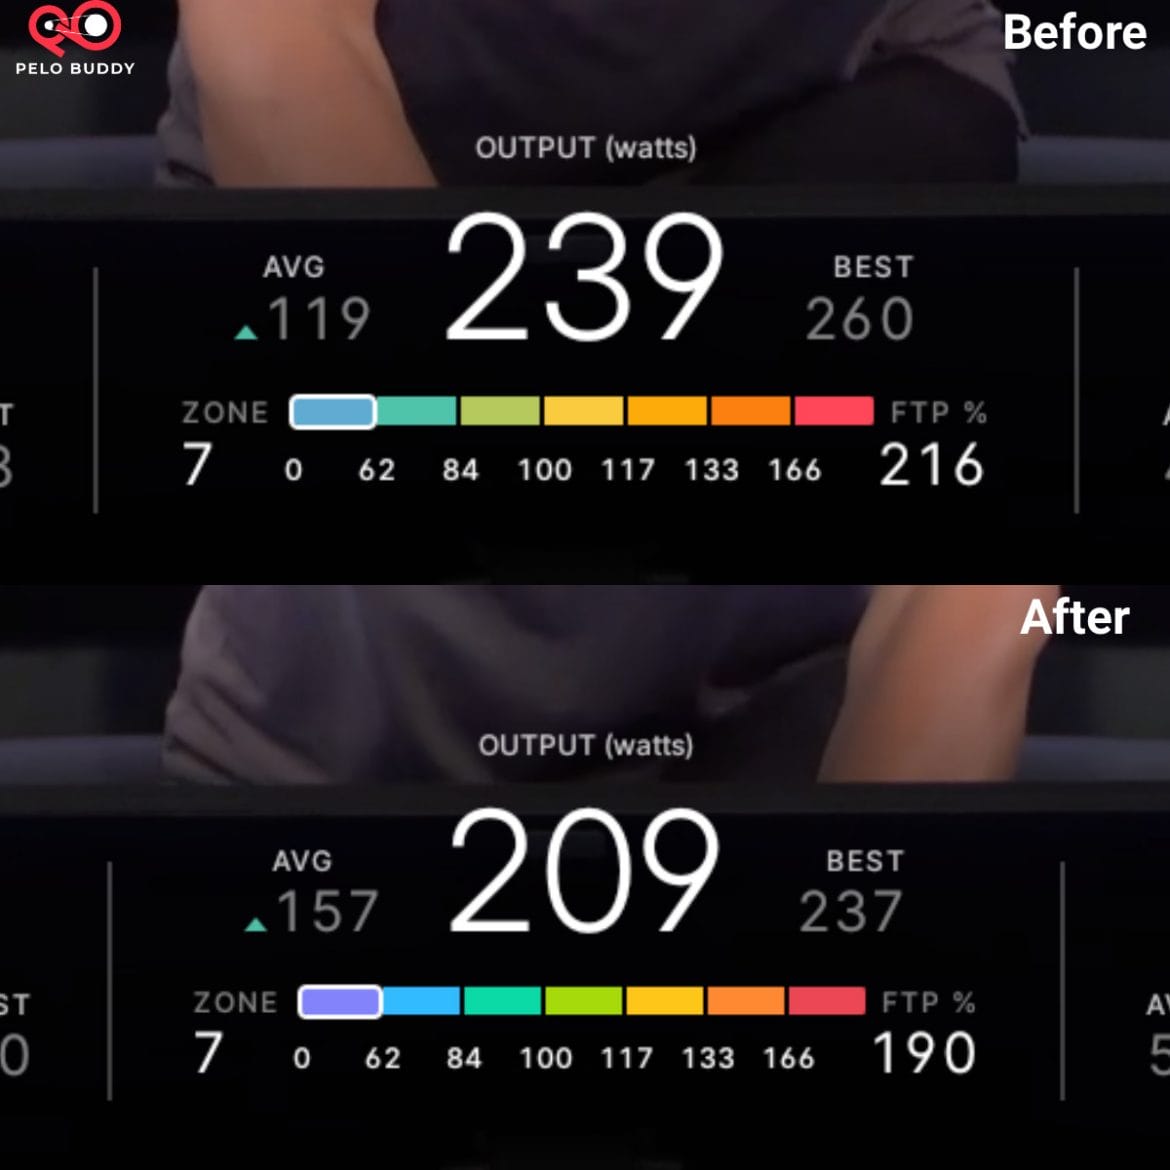 Comparing before vs after of Peloton power zone bar colors.